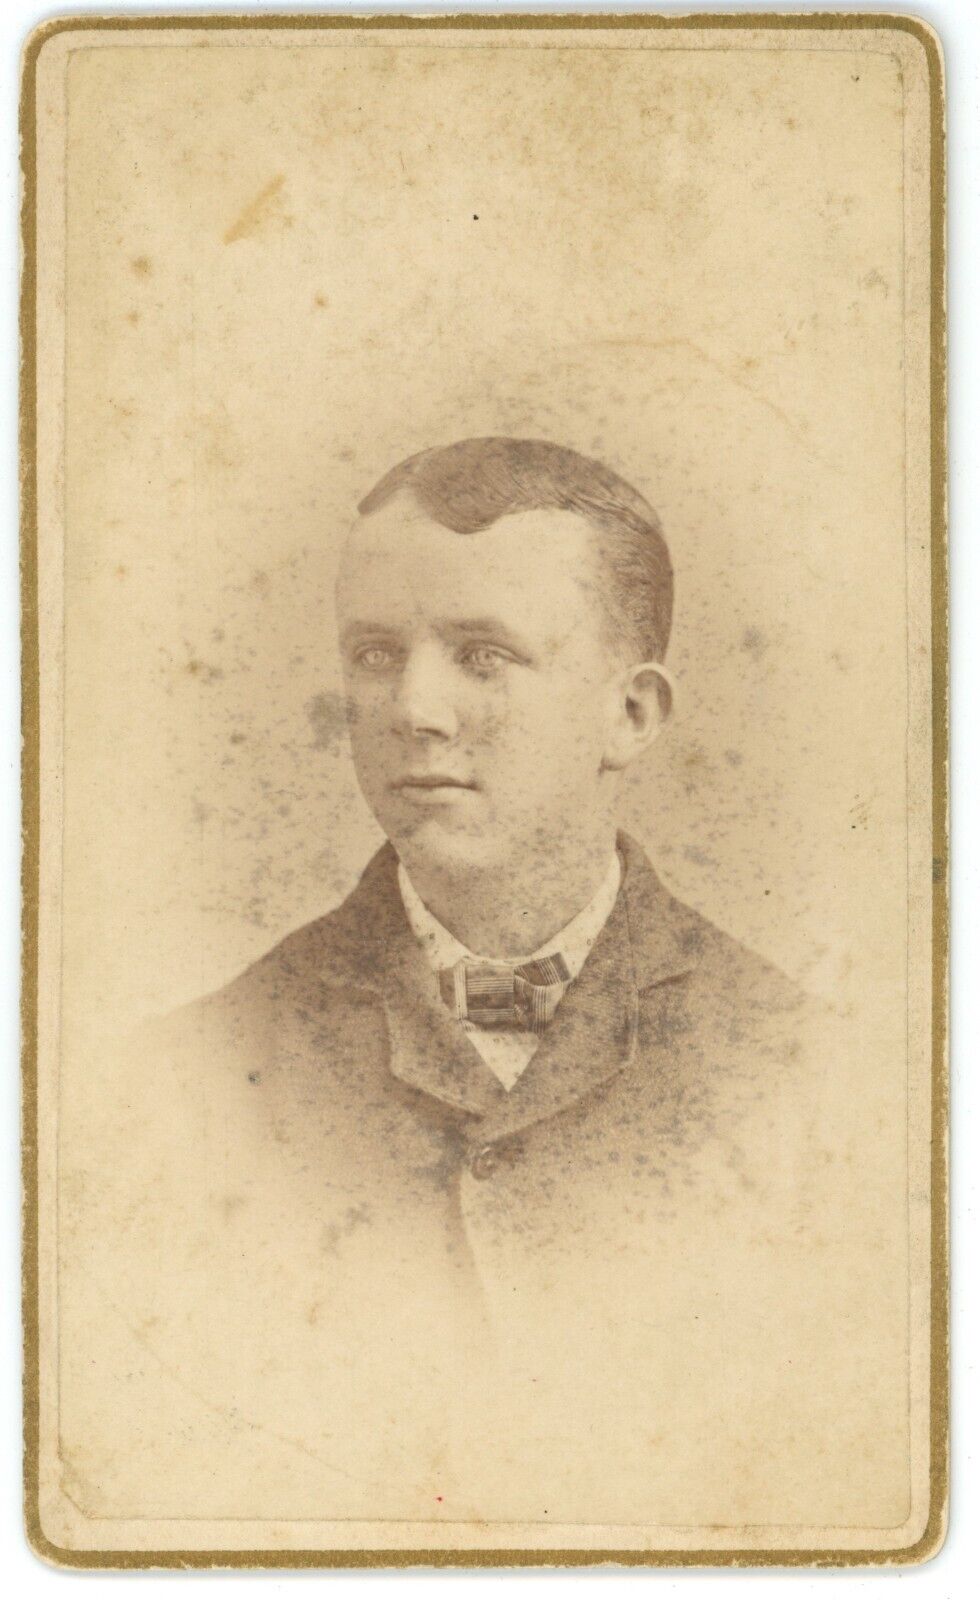 CIRCA 1870'S ANTIQUE CDV OF YOUNG BOY IN SUIT W. HAUNTING PIERCING EYES - NAMED